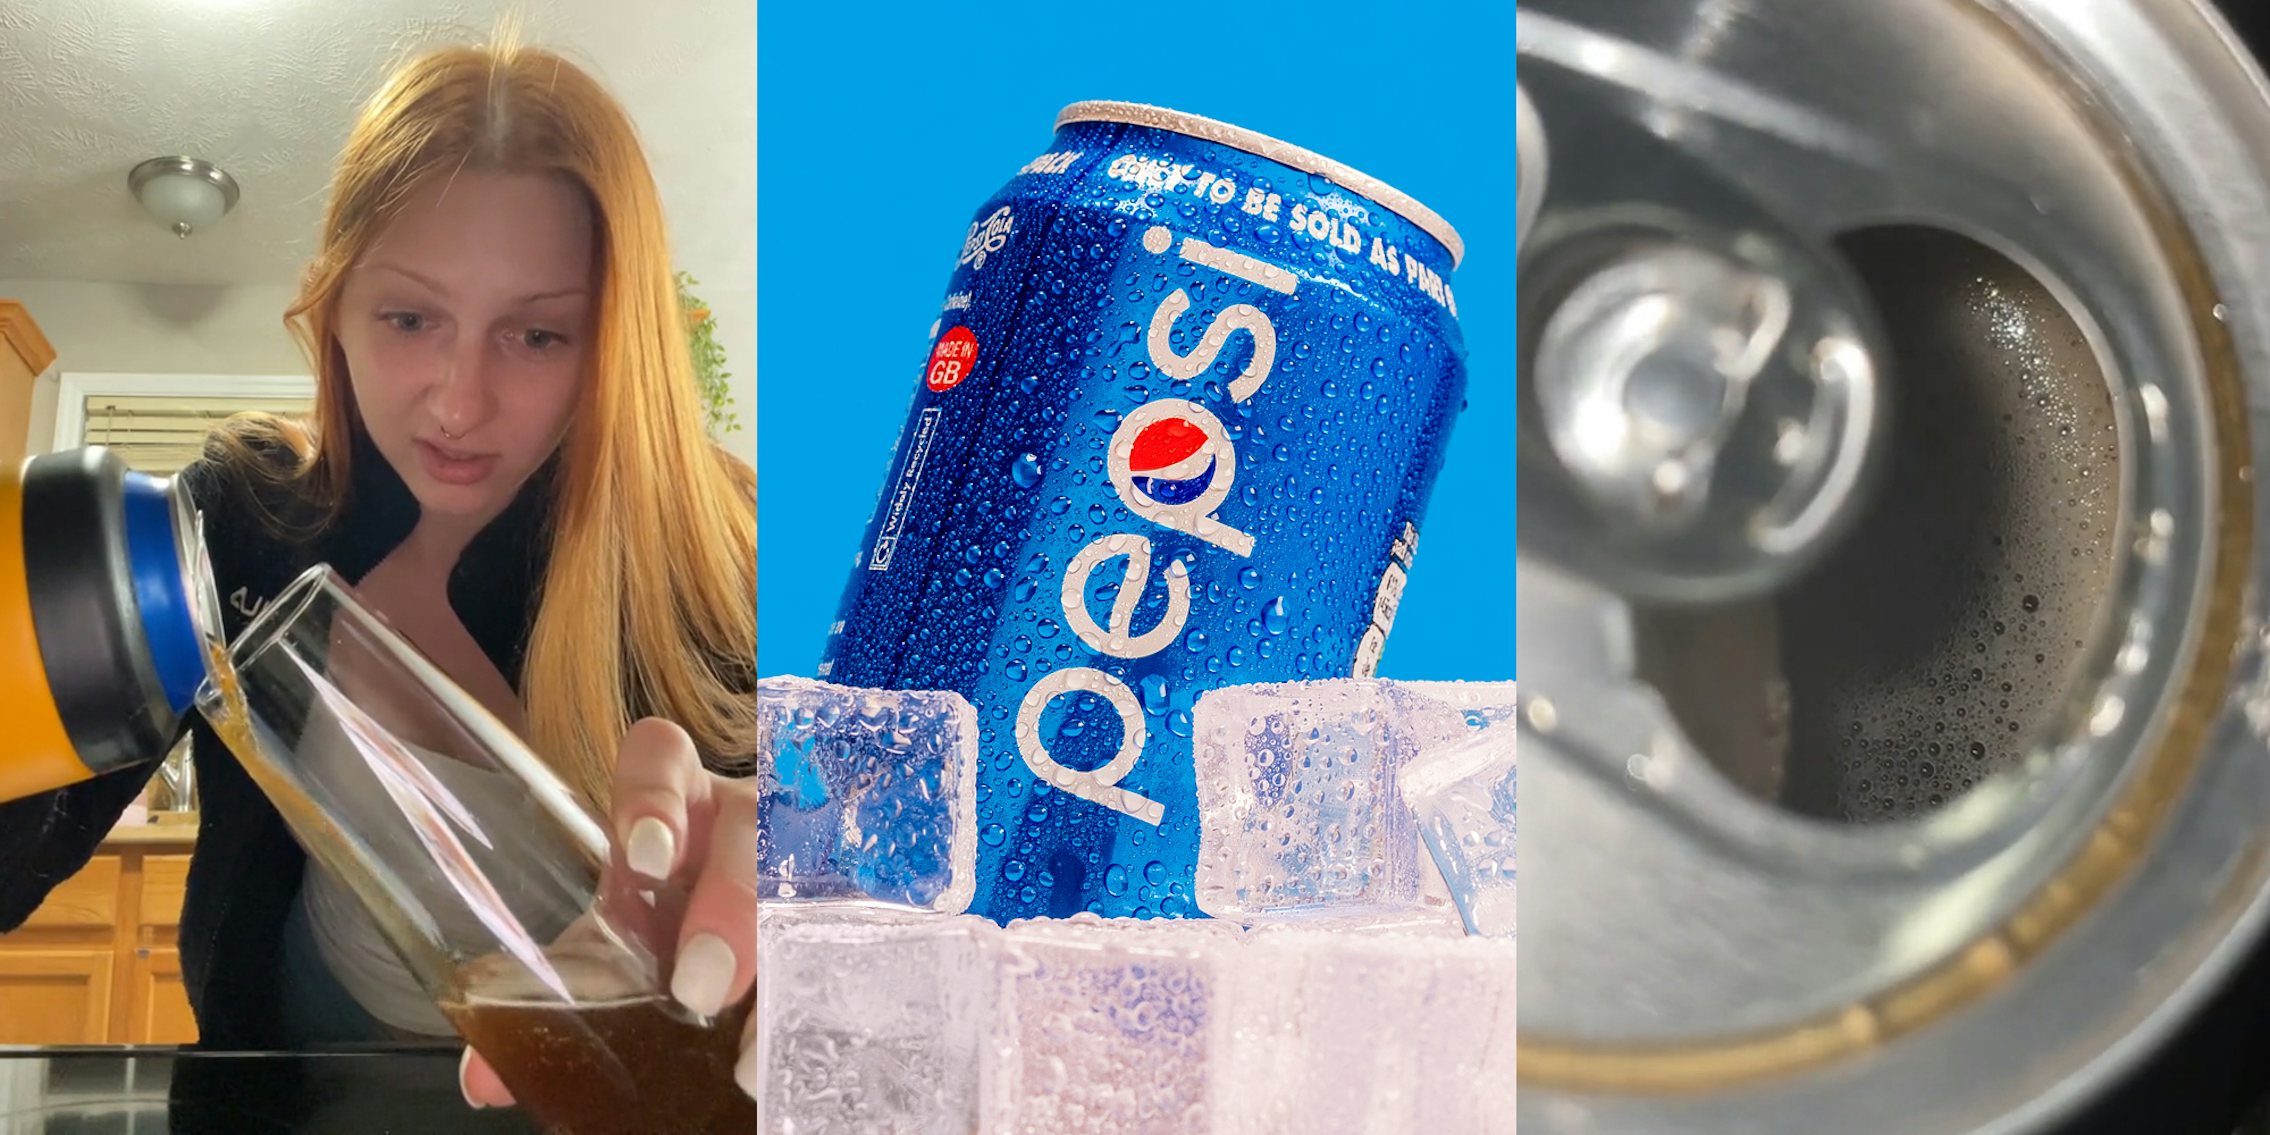 Pepsi customer pouring Pepsi from can into glass (l) Pepsi in can with ice in front of blue background (c) Pepsi in can (r)